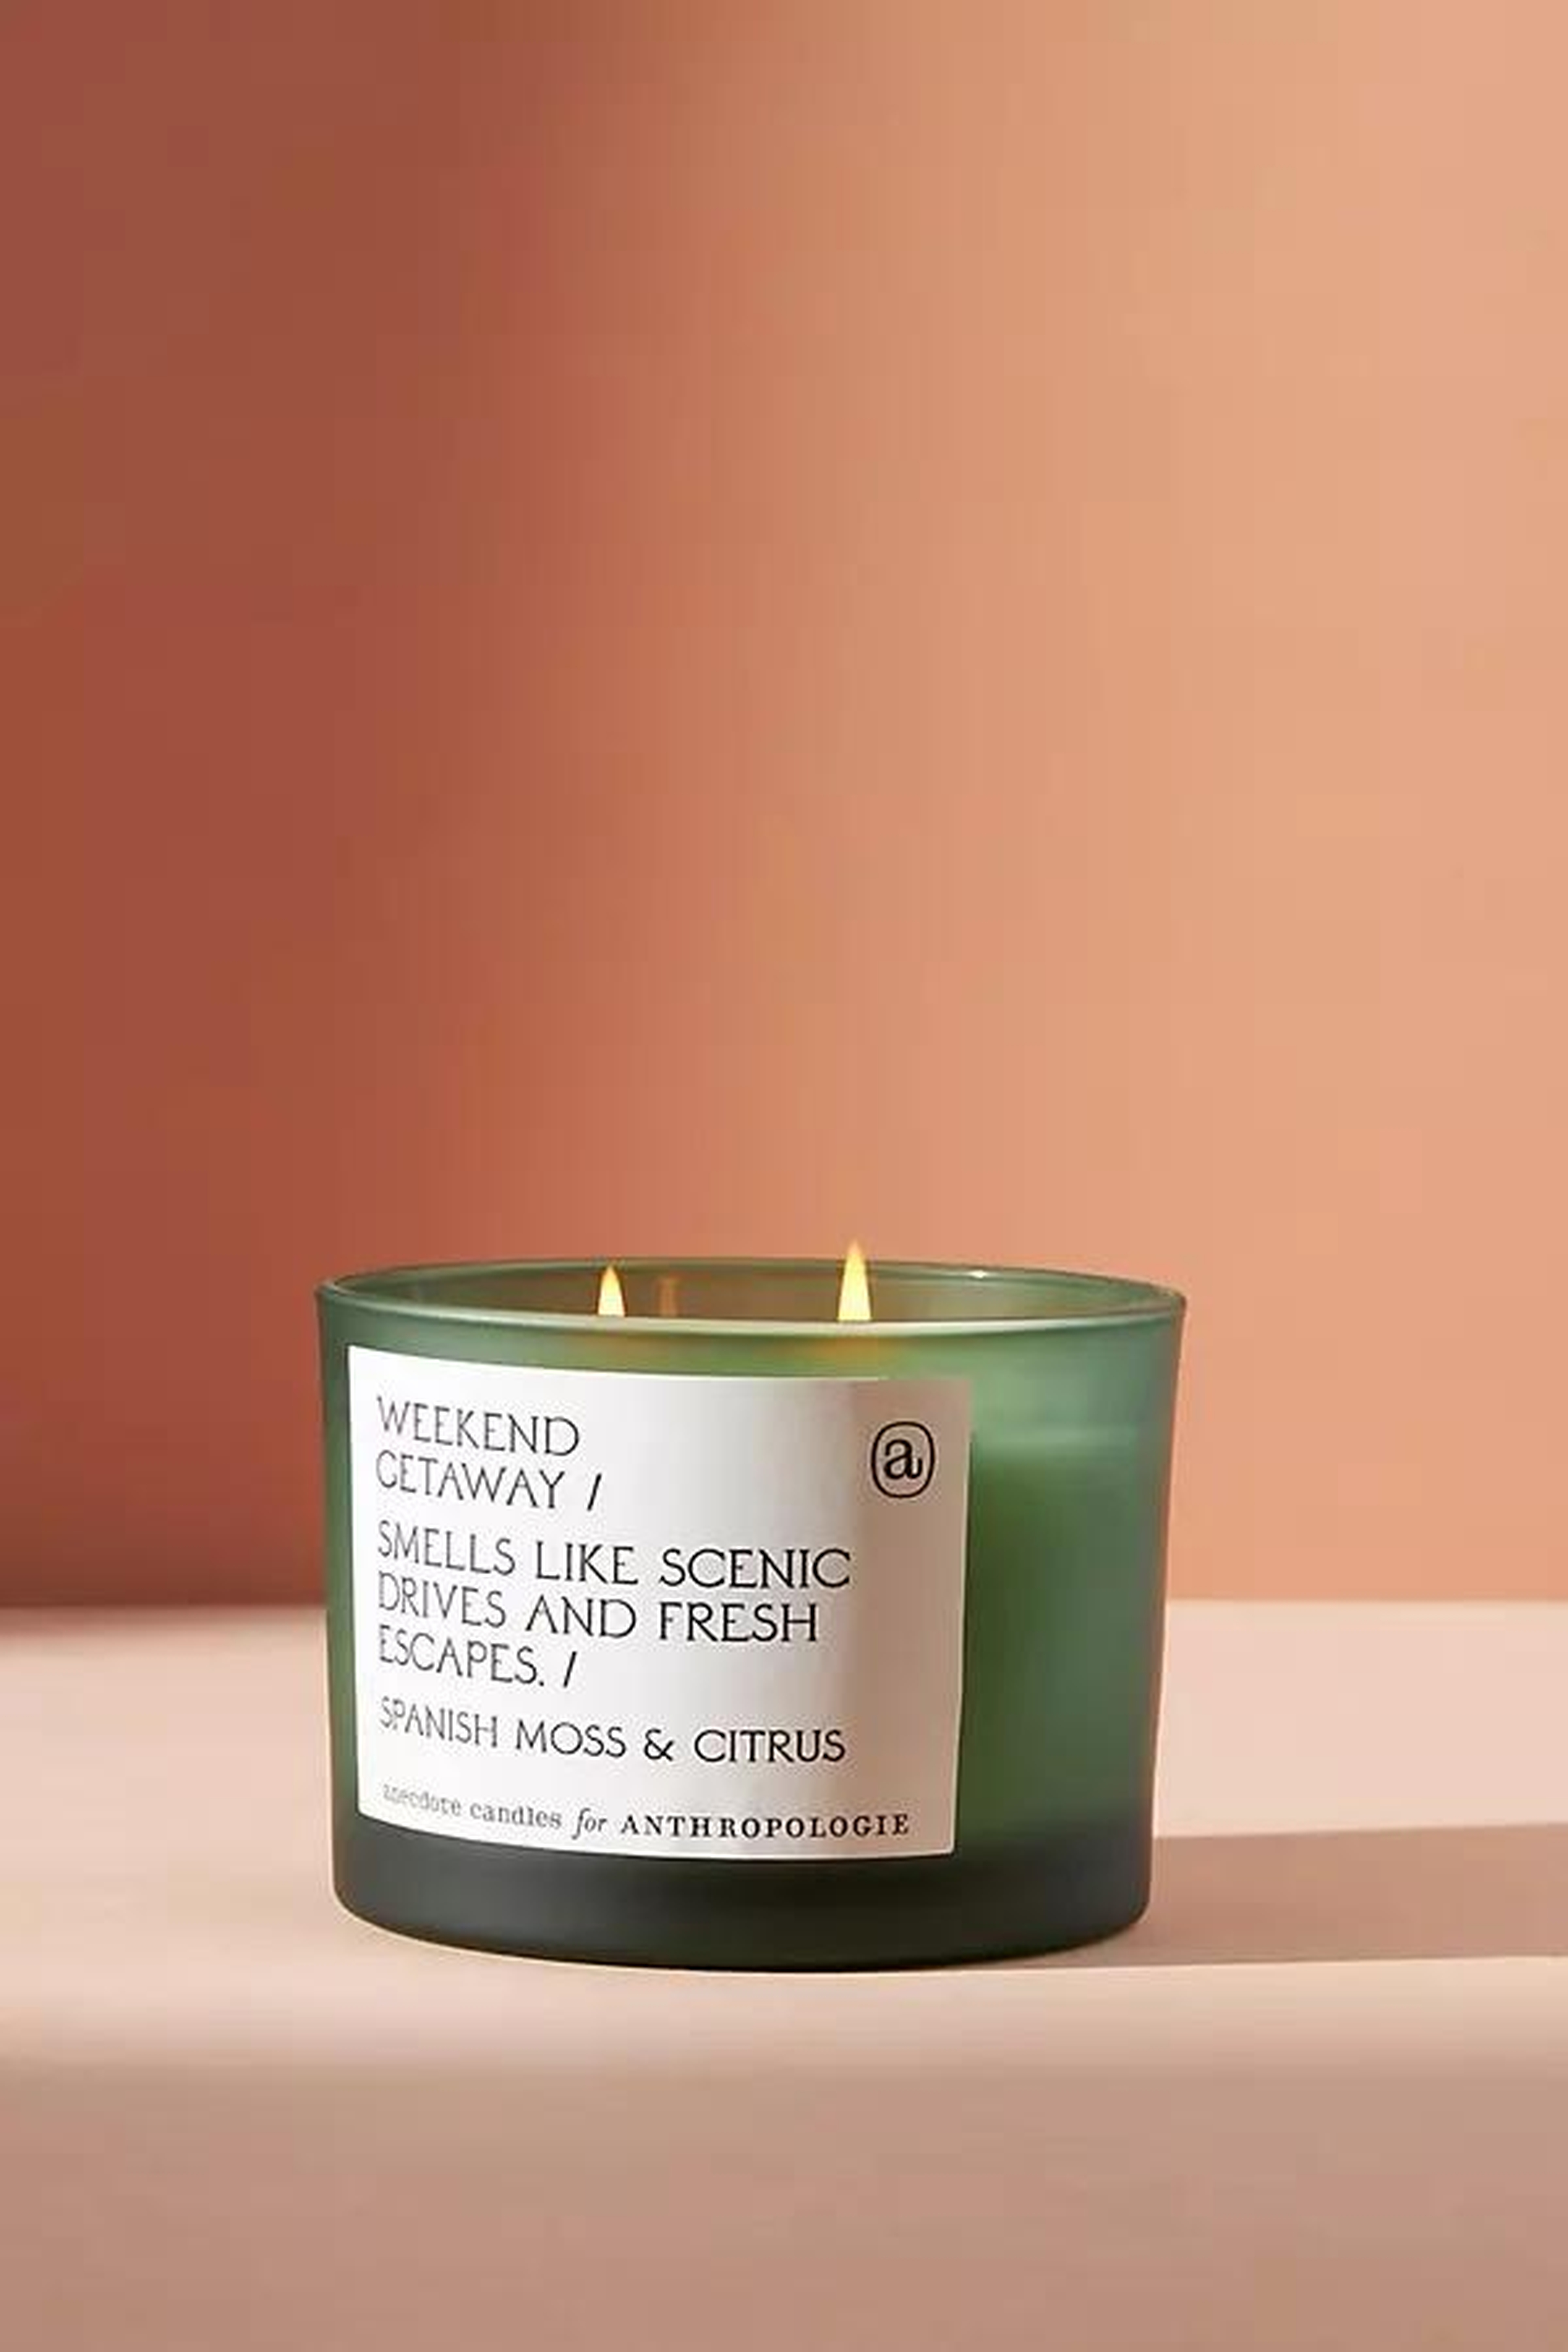 Anecdote Autumn Glass Candle, Weekend Getaway - Anthropologie